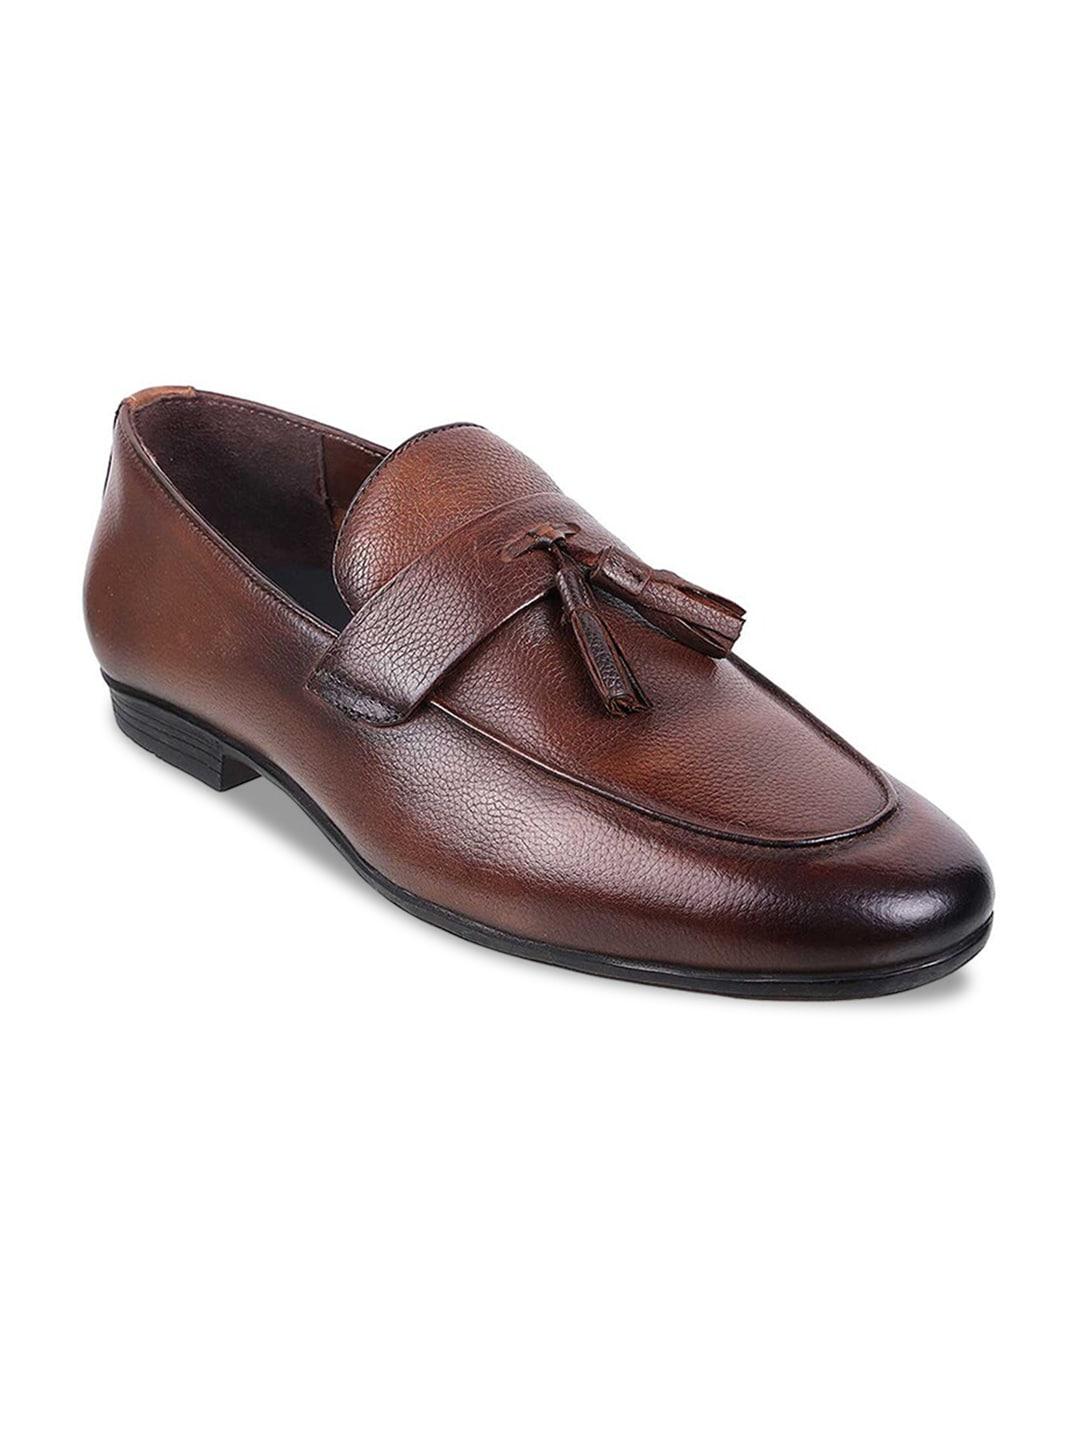 metro-men-leather-formal-loafers